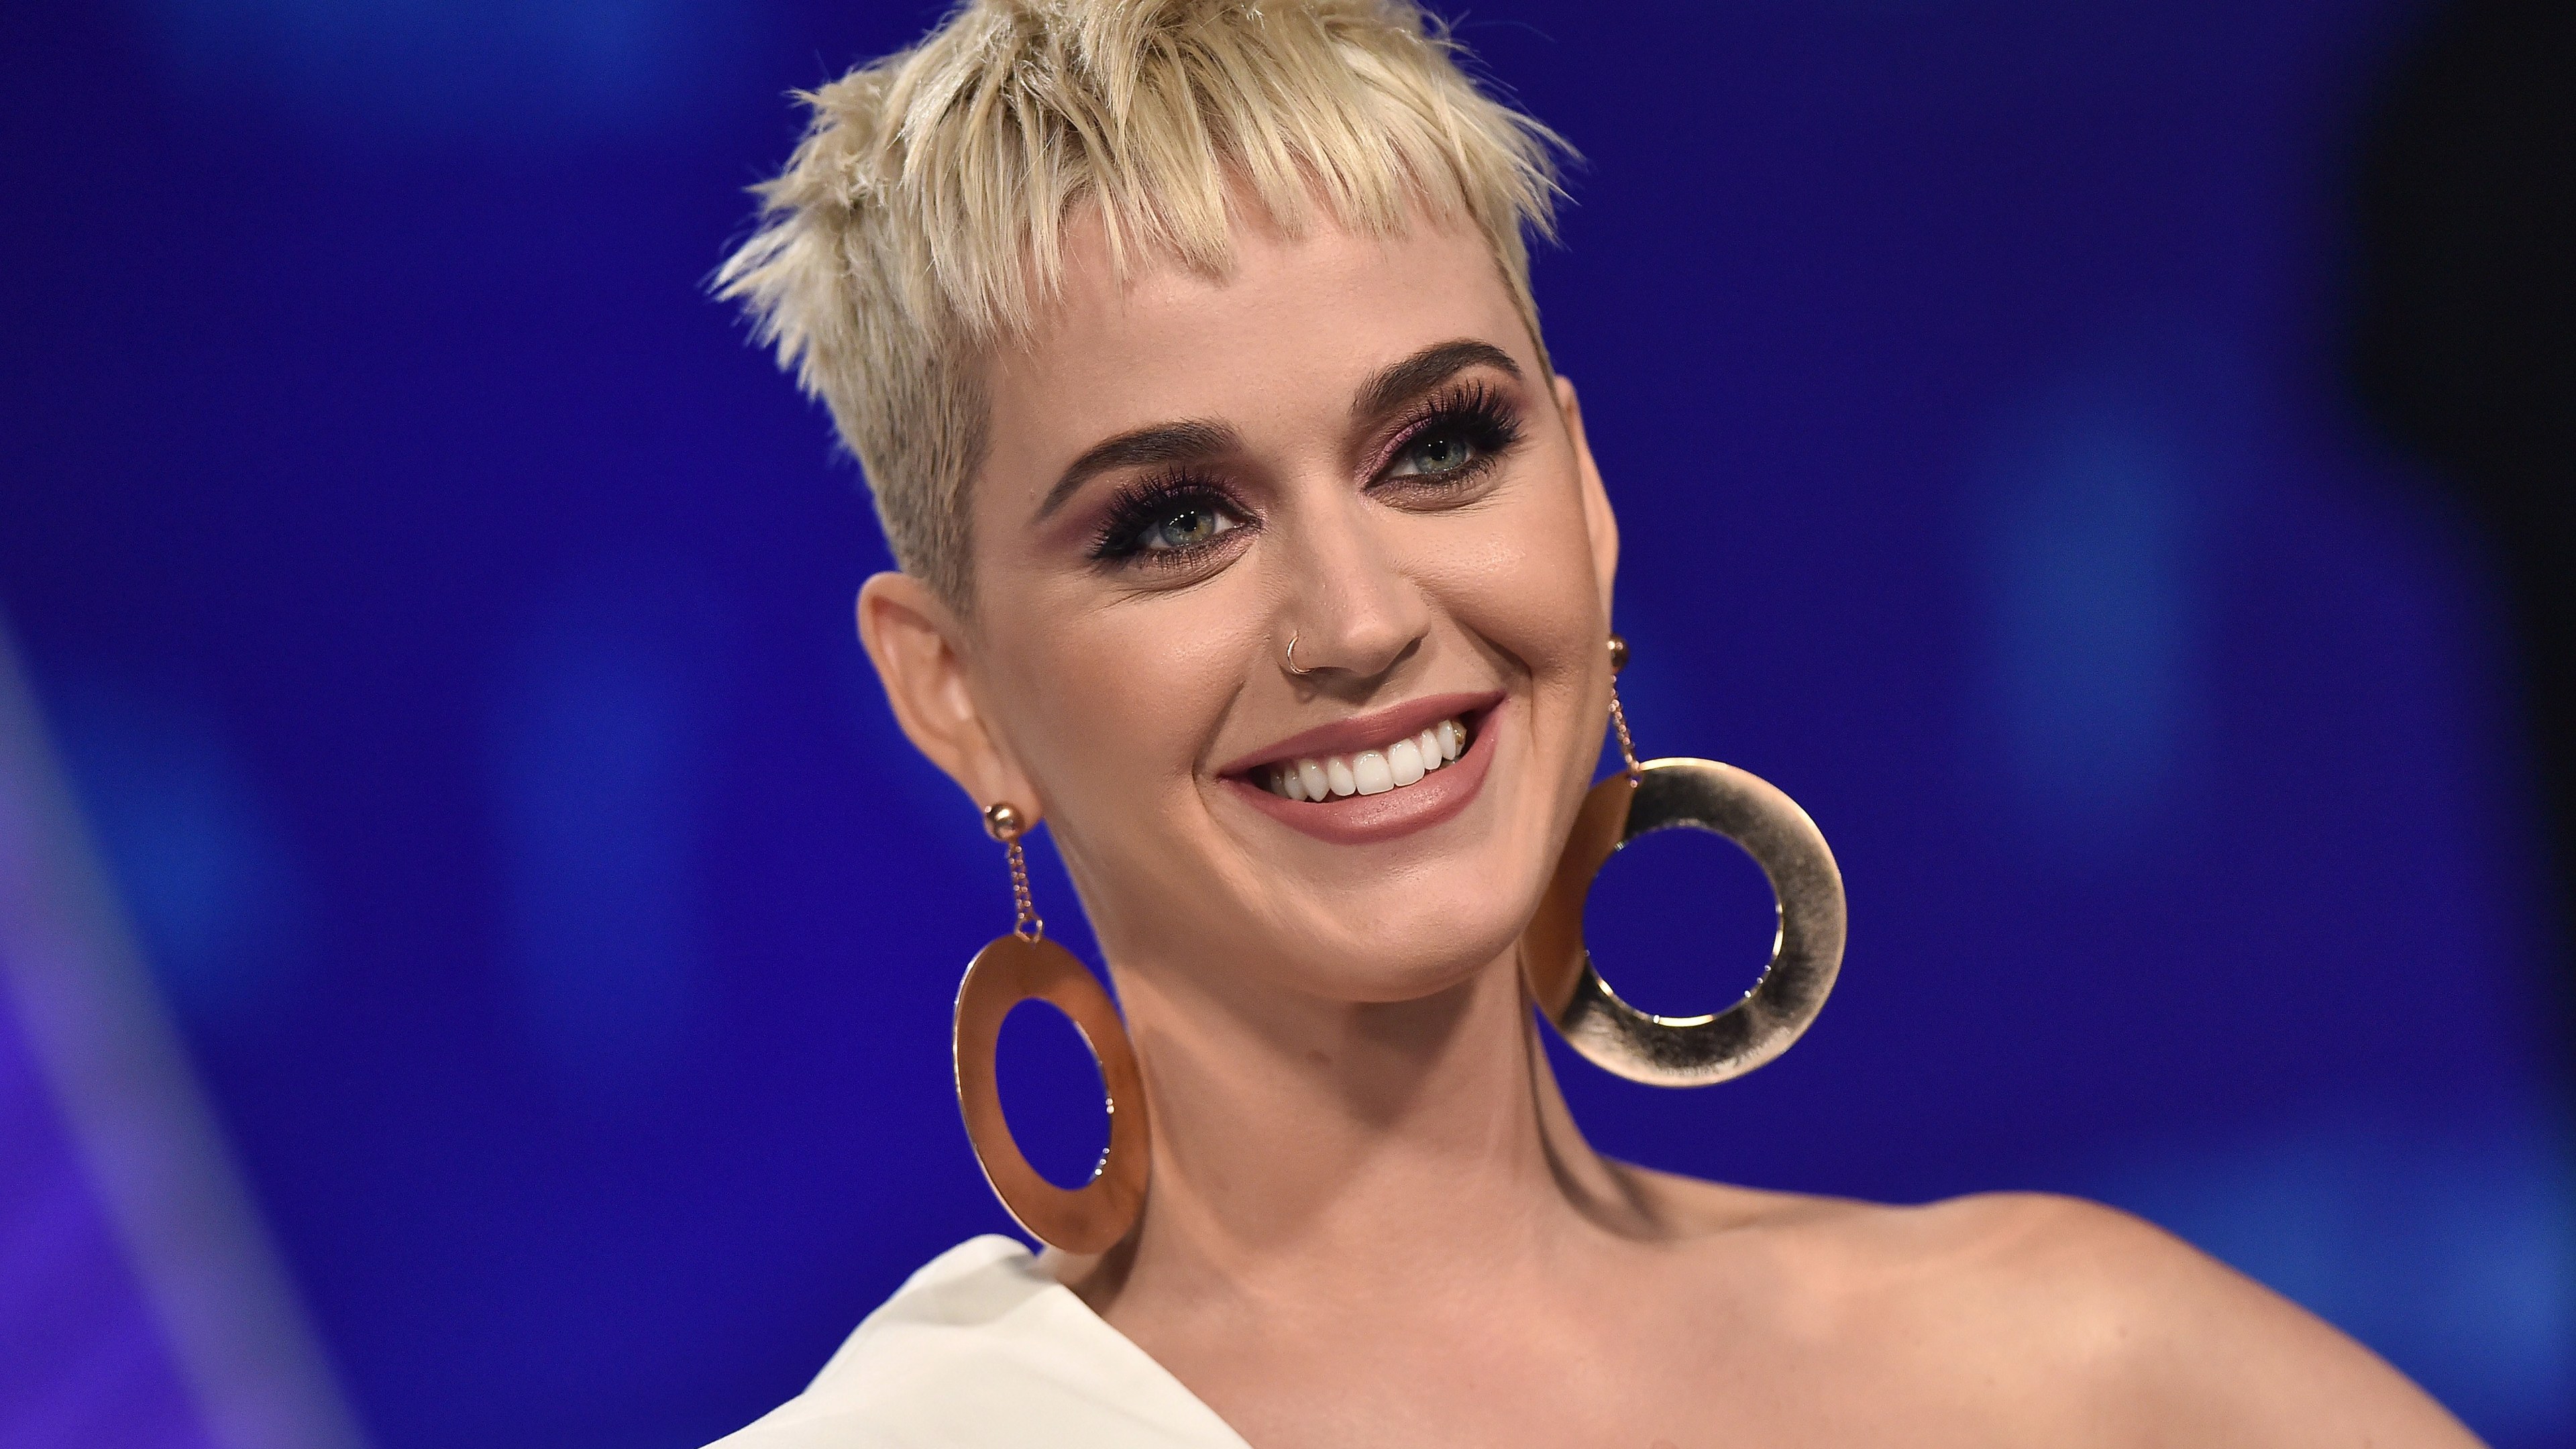 katy perry 5k 2019 1536862957 - Katy Perry 5k 2019 - music wallpapers, katy perry wallpapers, hd-wallpapers, celebrities wallpapers, 5k wallpapers, 4k-wallpapers